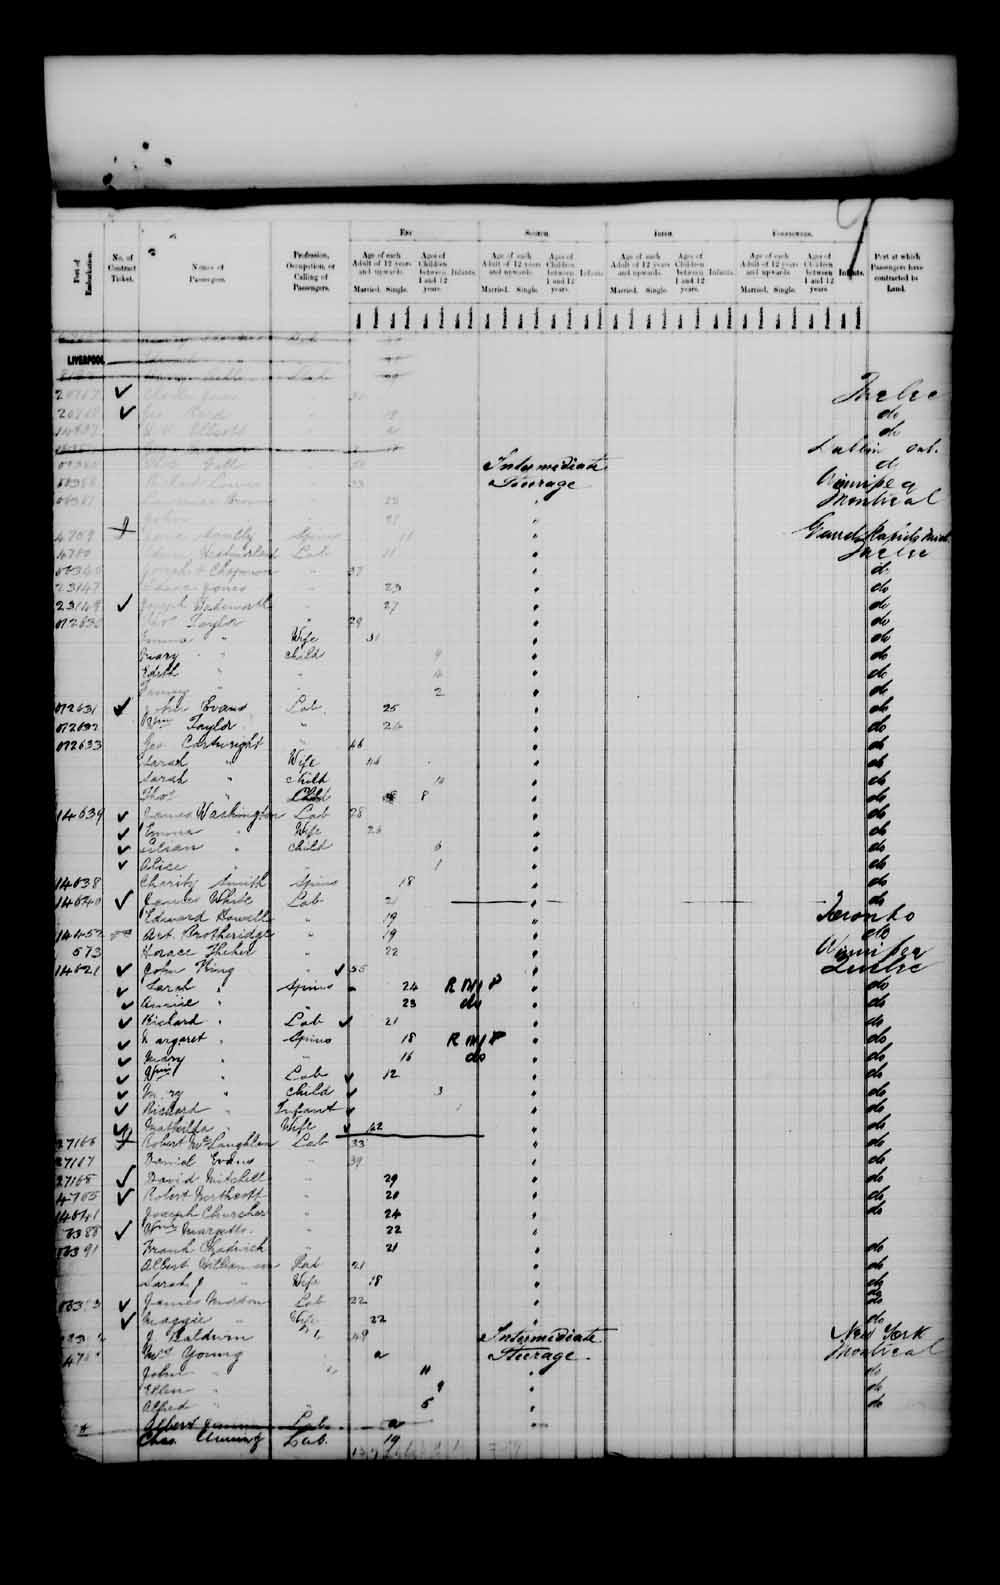 Digitized page of Passenger Lists for Image No.: e003542777